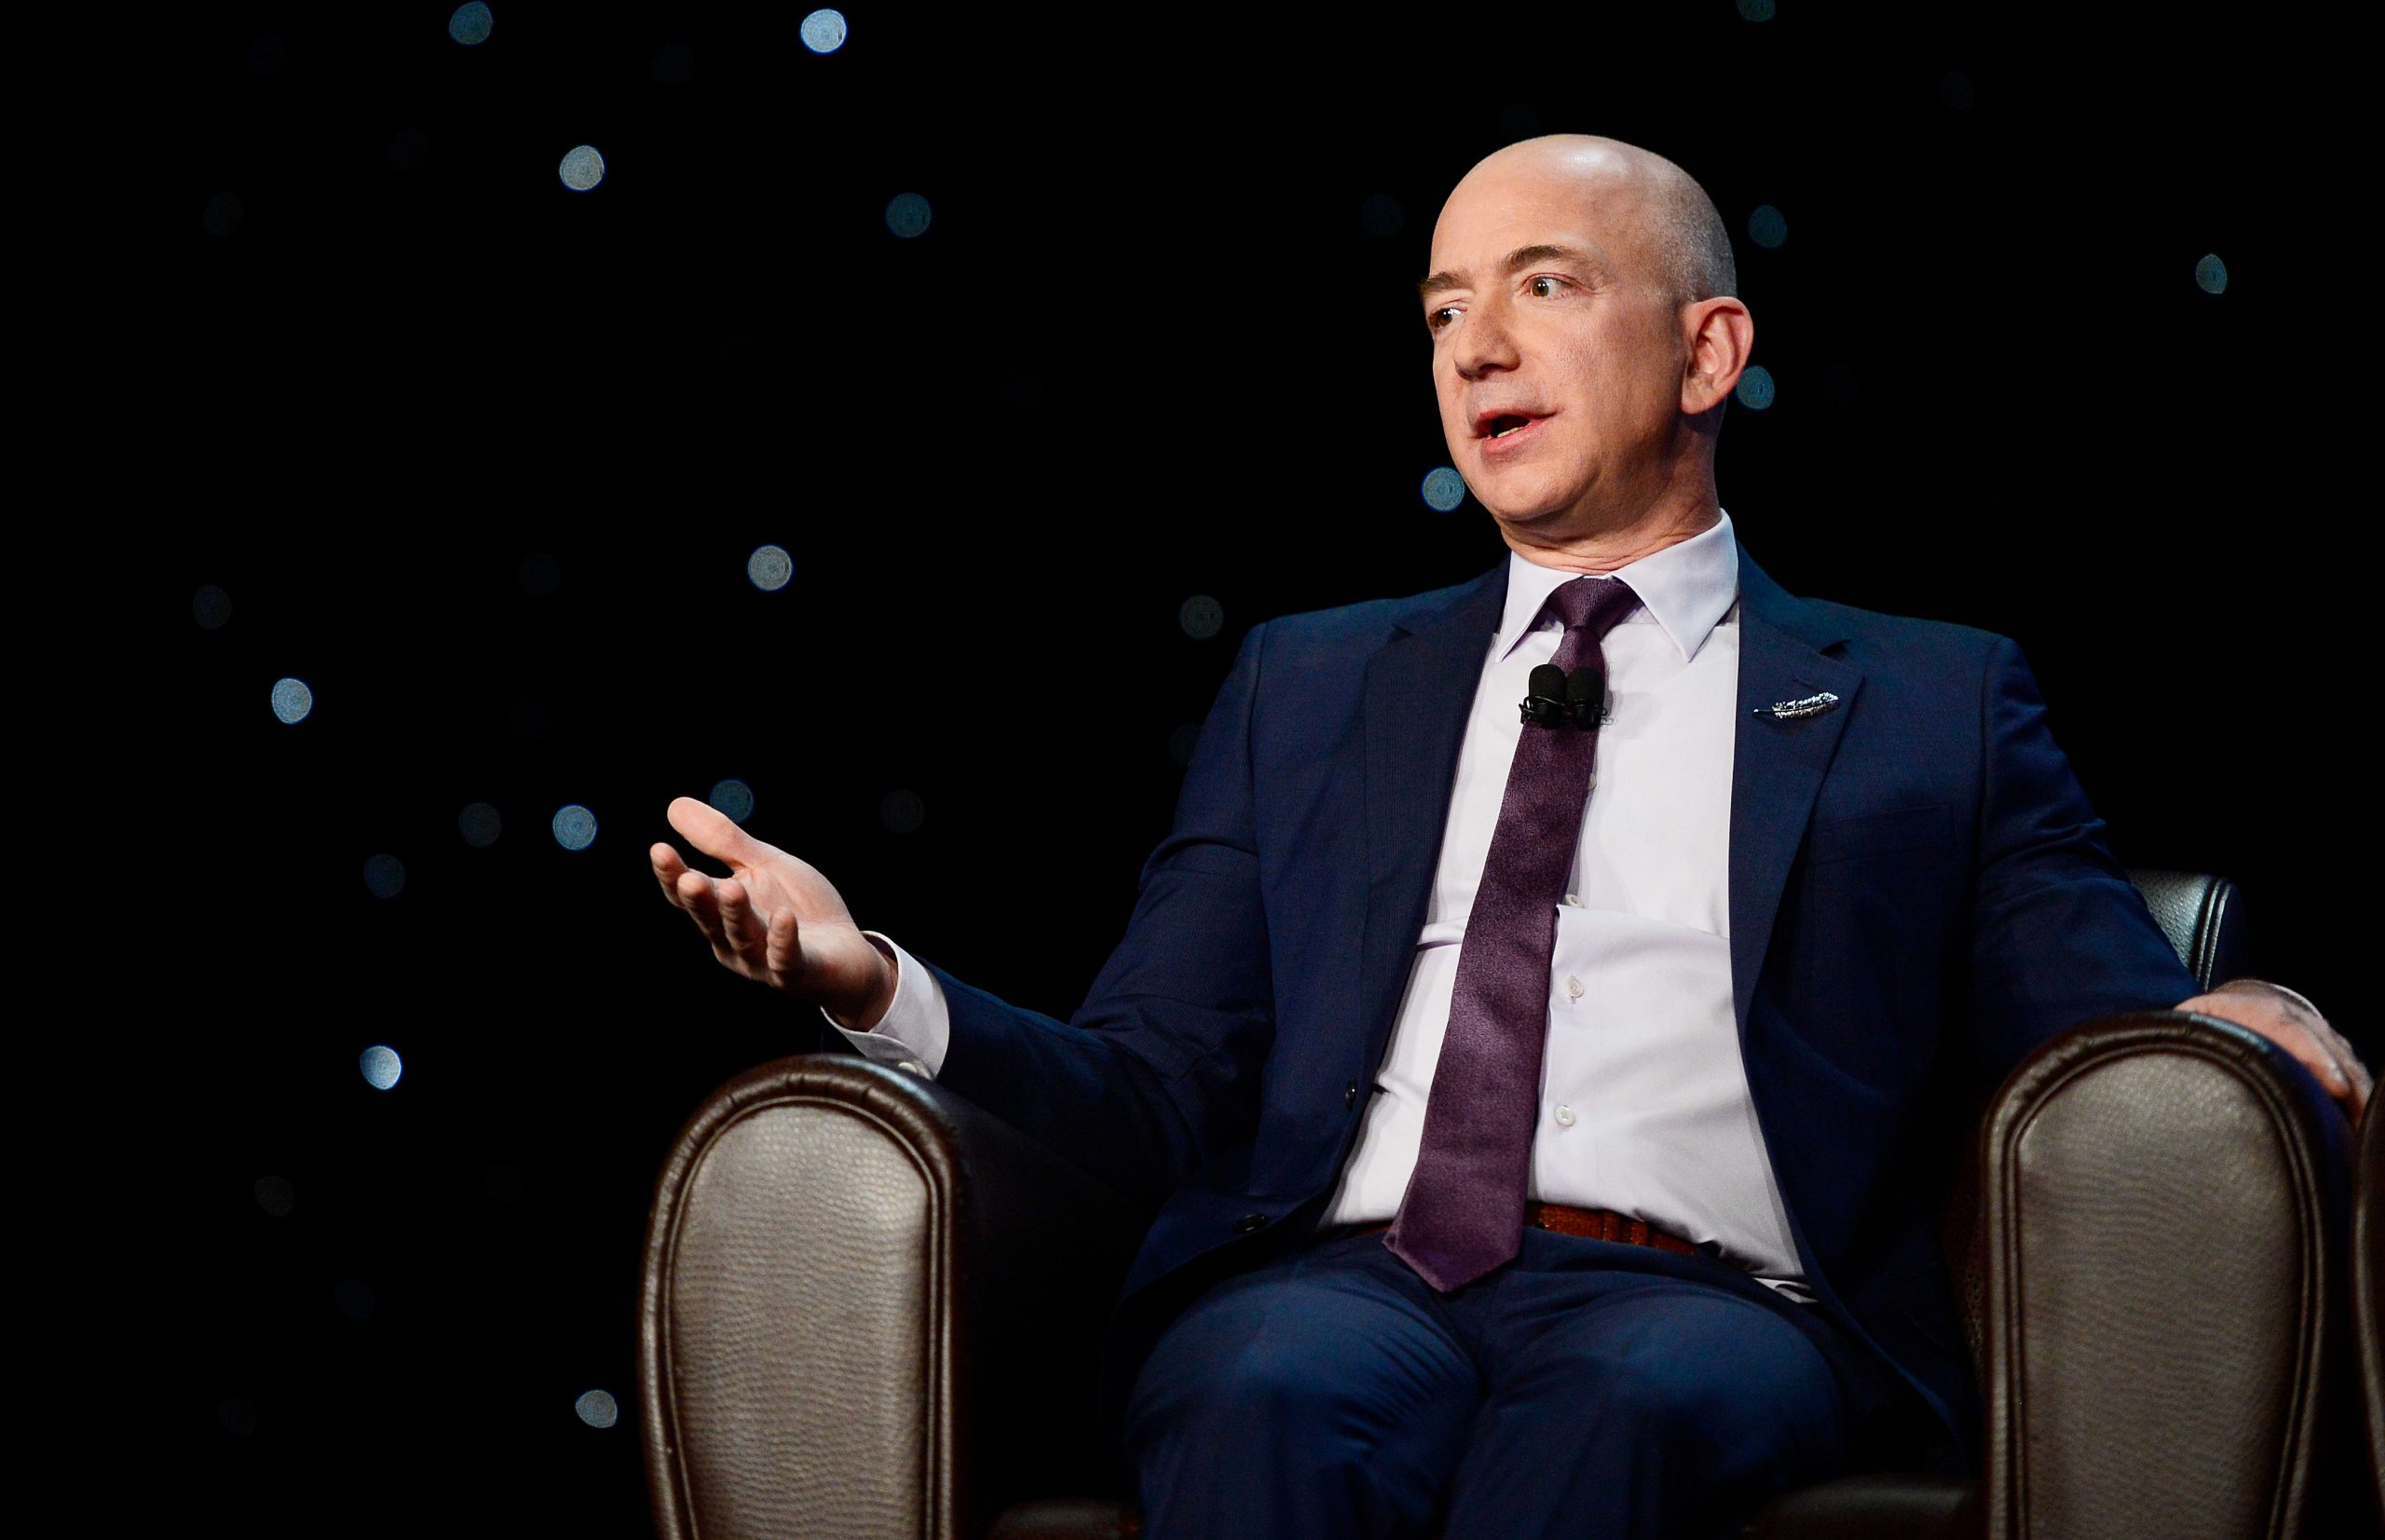 Amazon’s Kuiper responds to Elon Musk’s SpaceX on FCC request